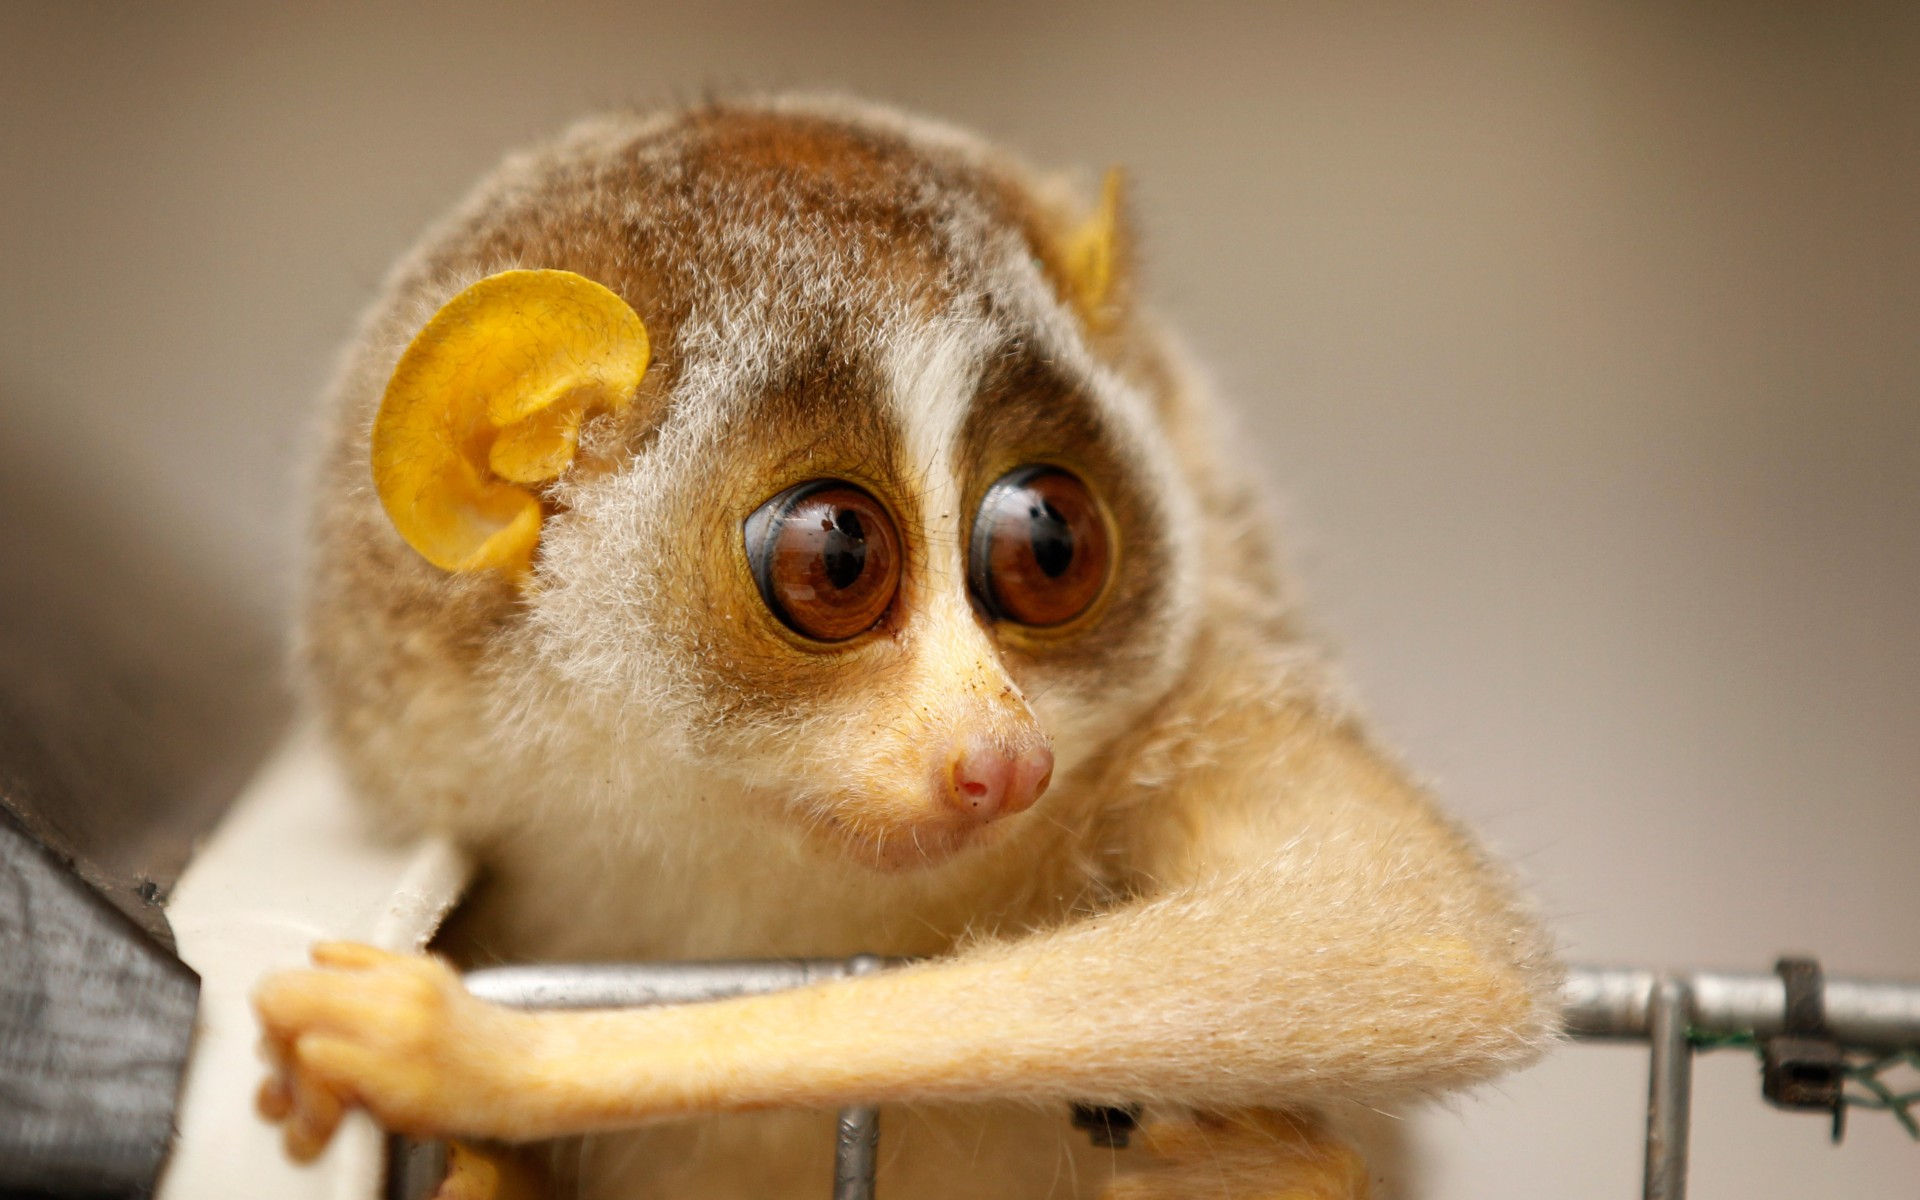 The fearsome Slow loris